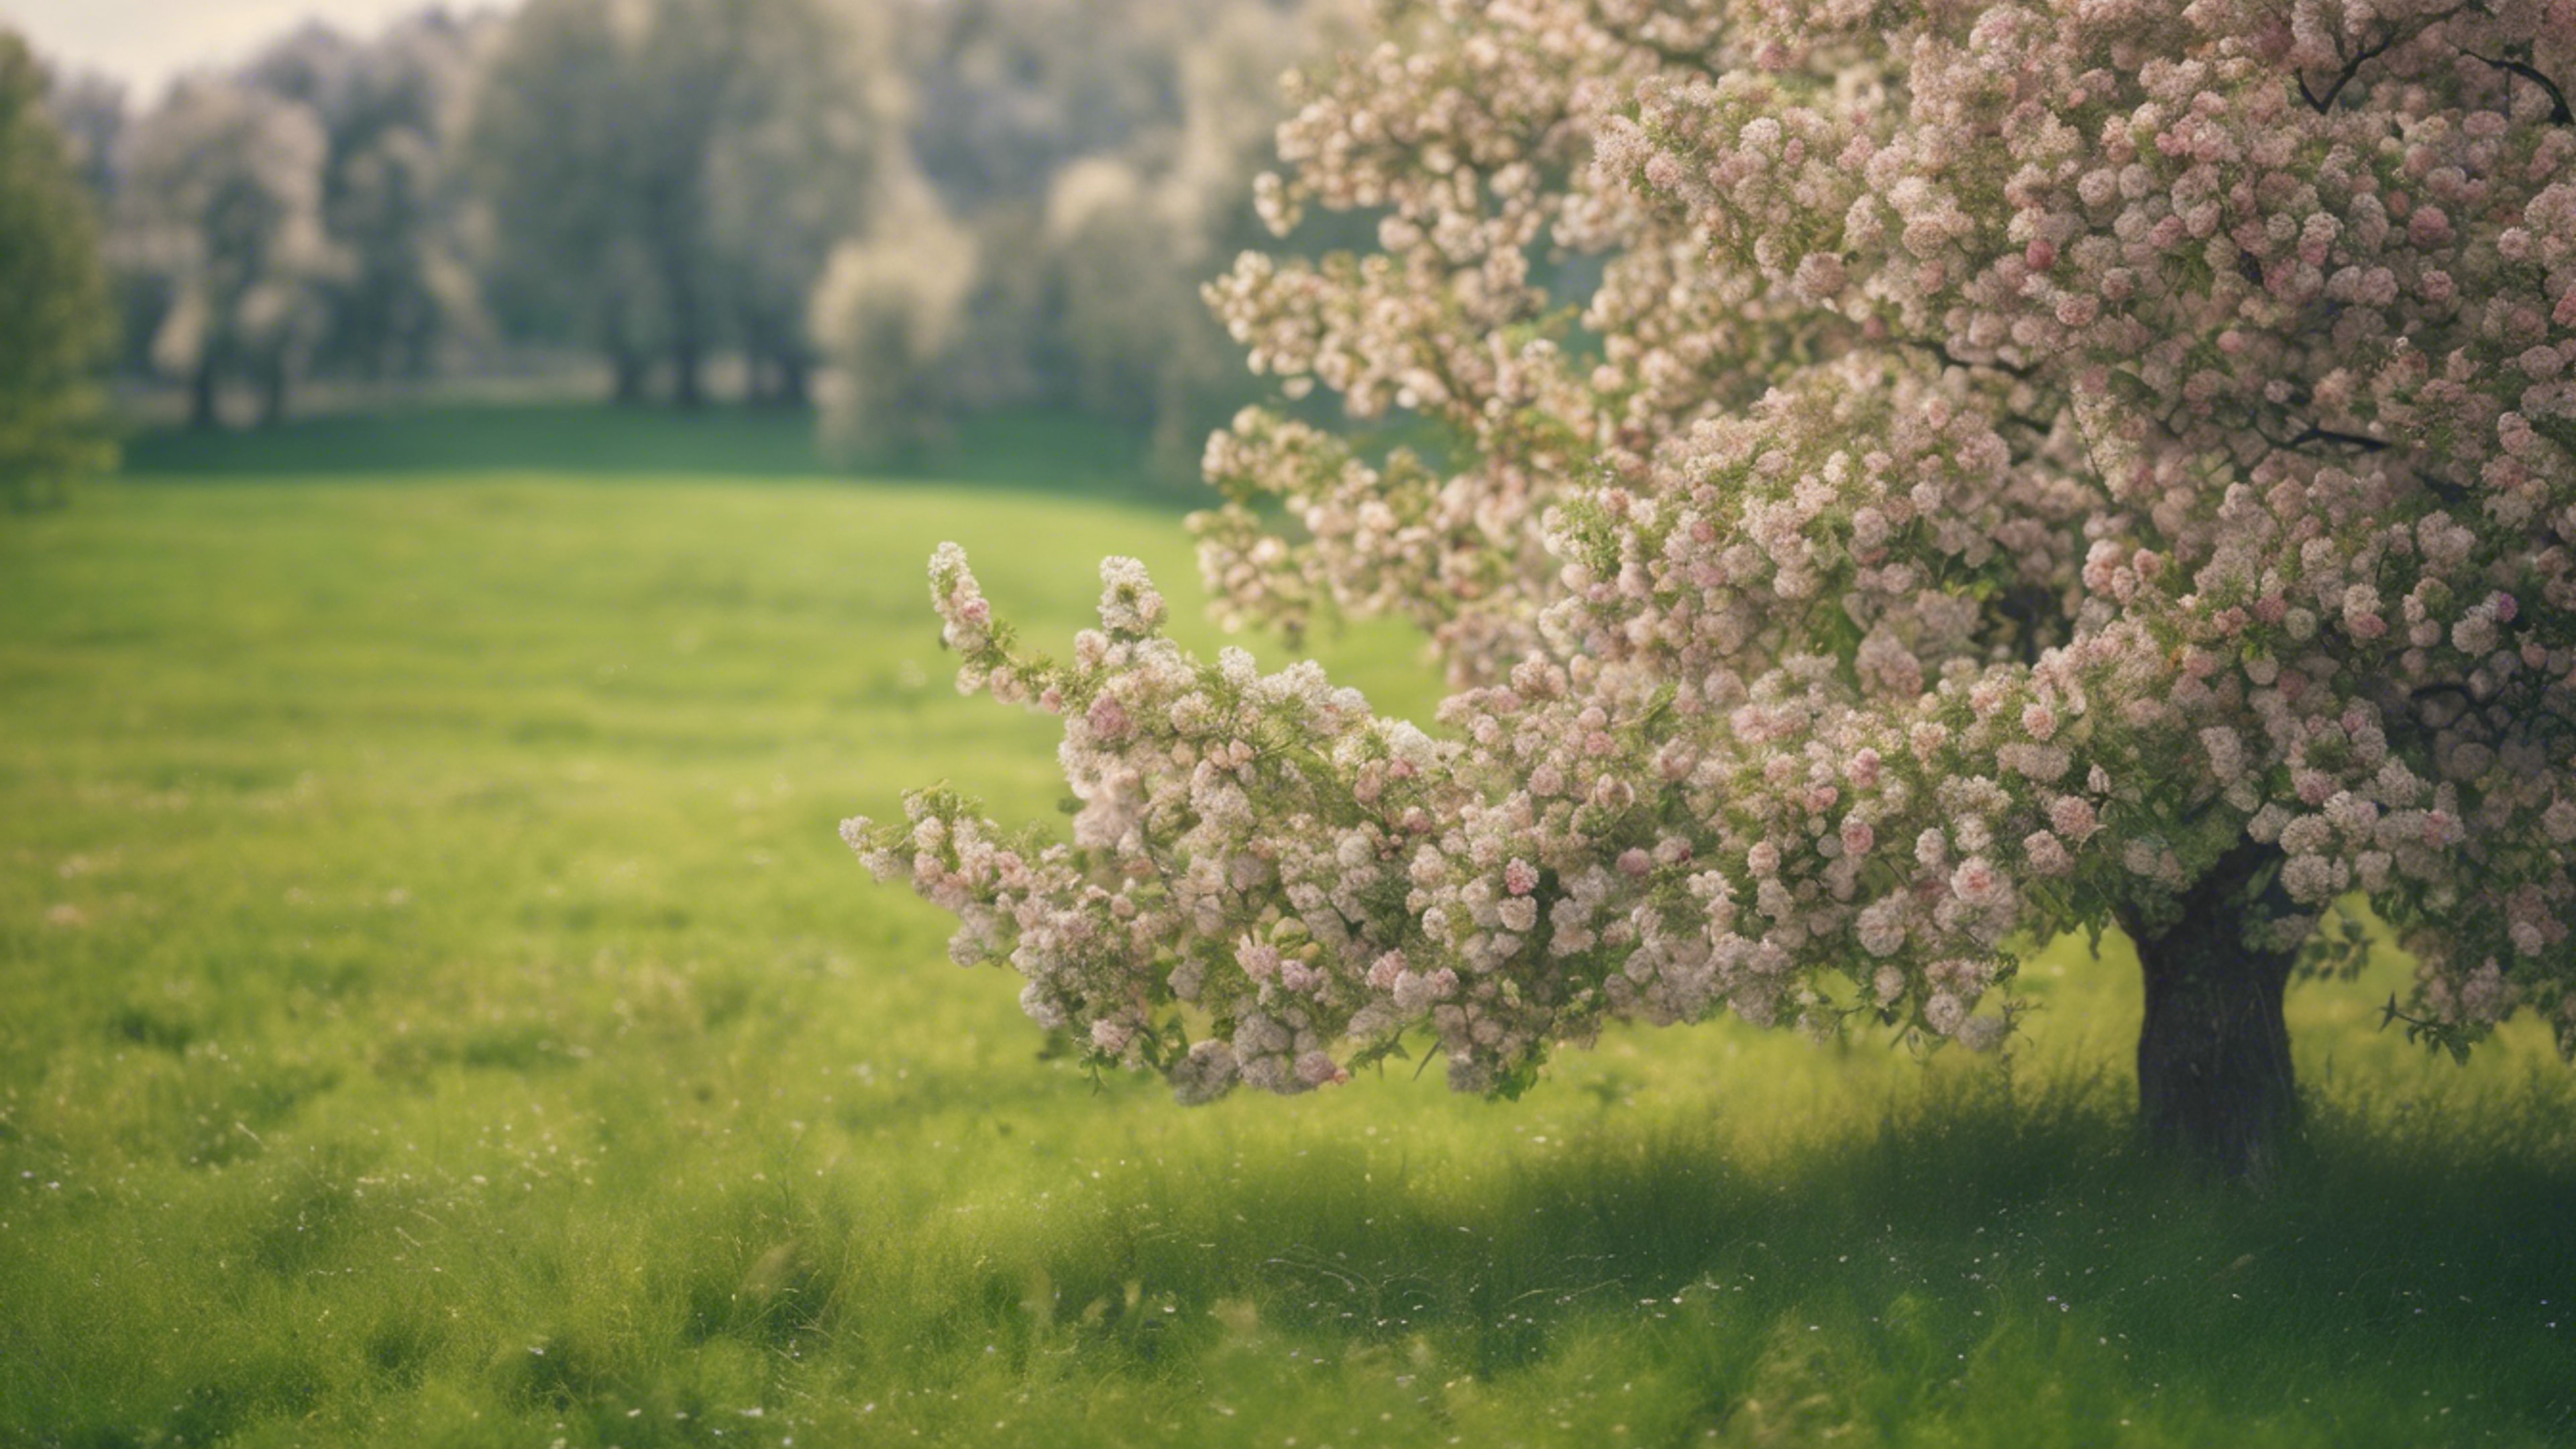 A flowering apple tree standing alone in a green, soft-focused meadow. Behang[1ff1aa7d7c75473a9031]